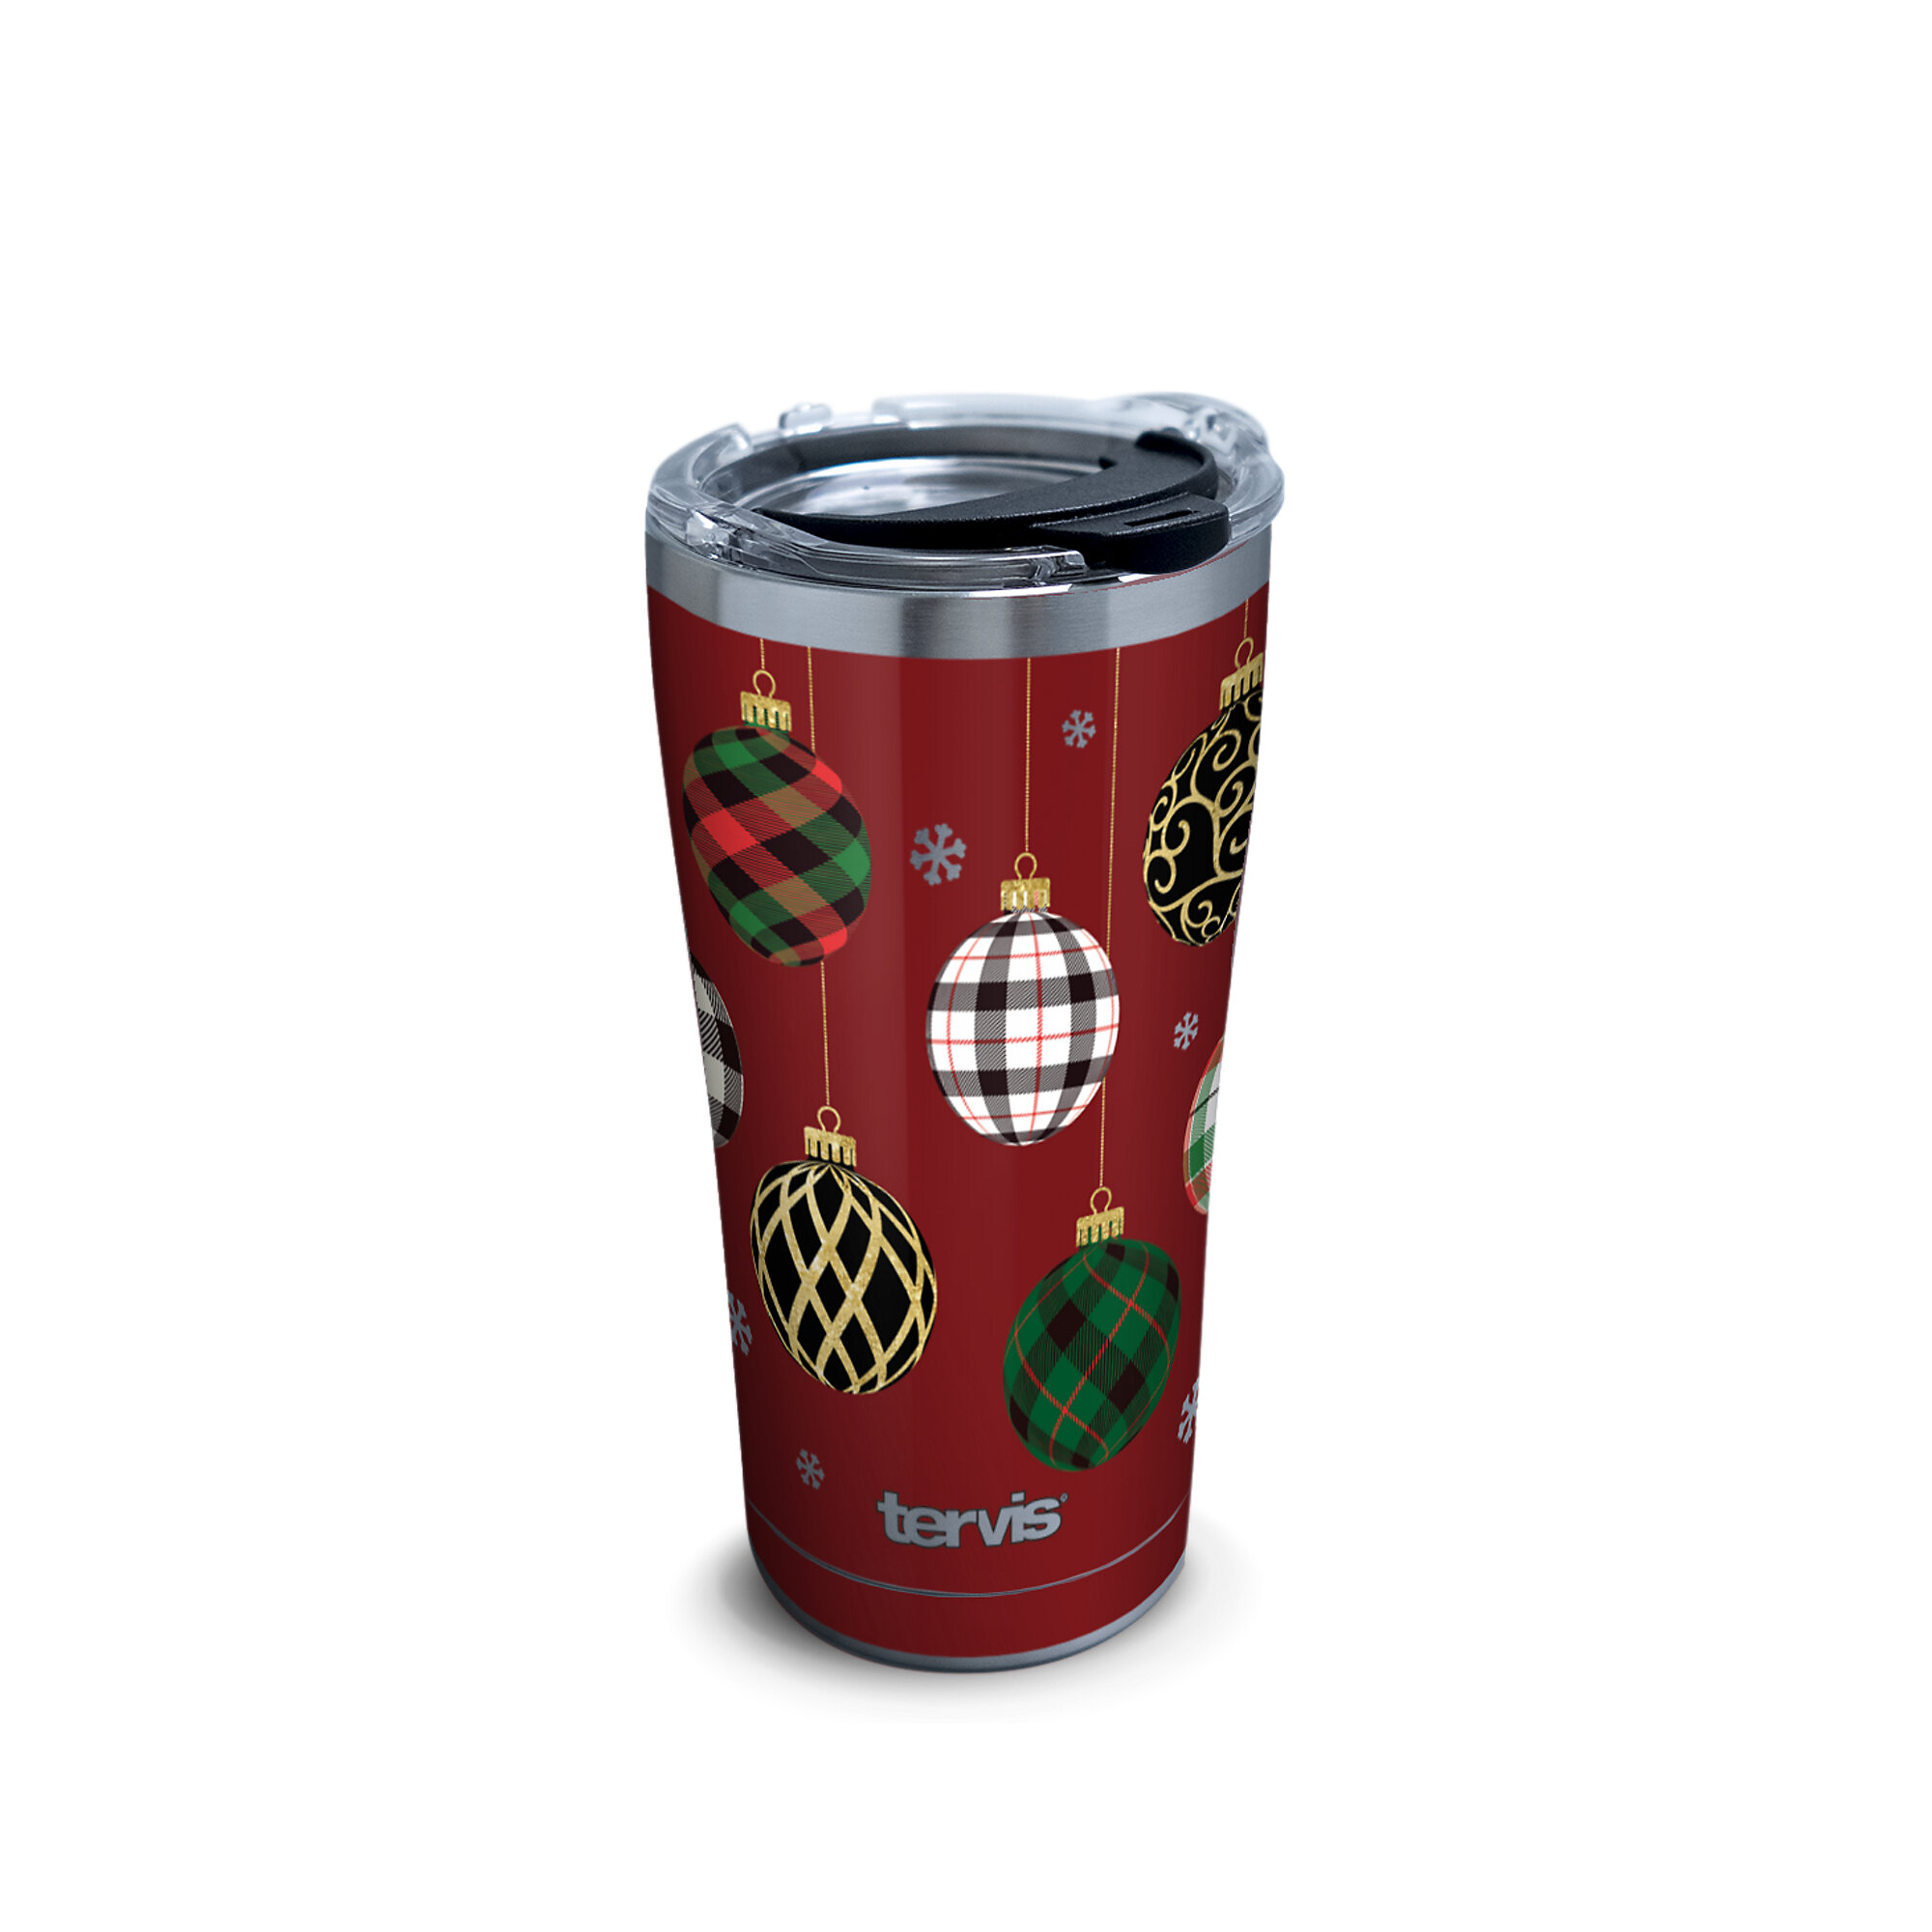 2019 Tervis Peanuts Be Merry 20 oz Stainless Steel Holiday Christmas Tumbler 